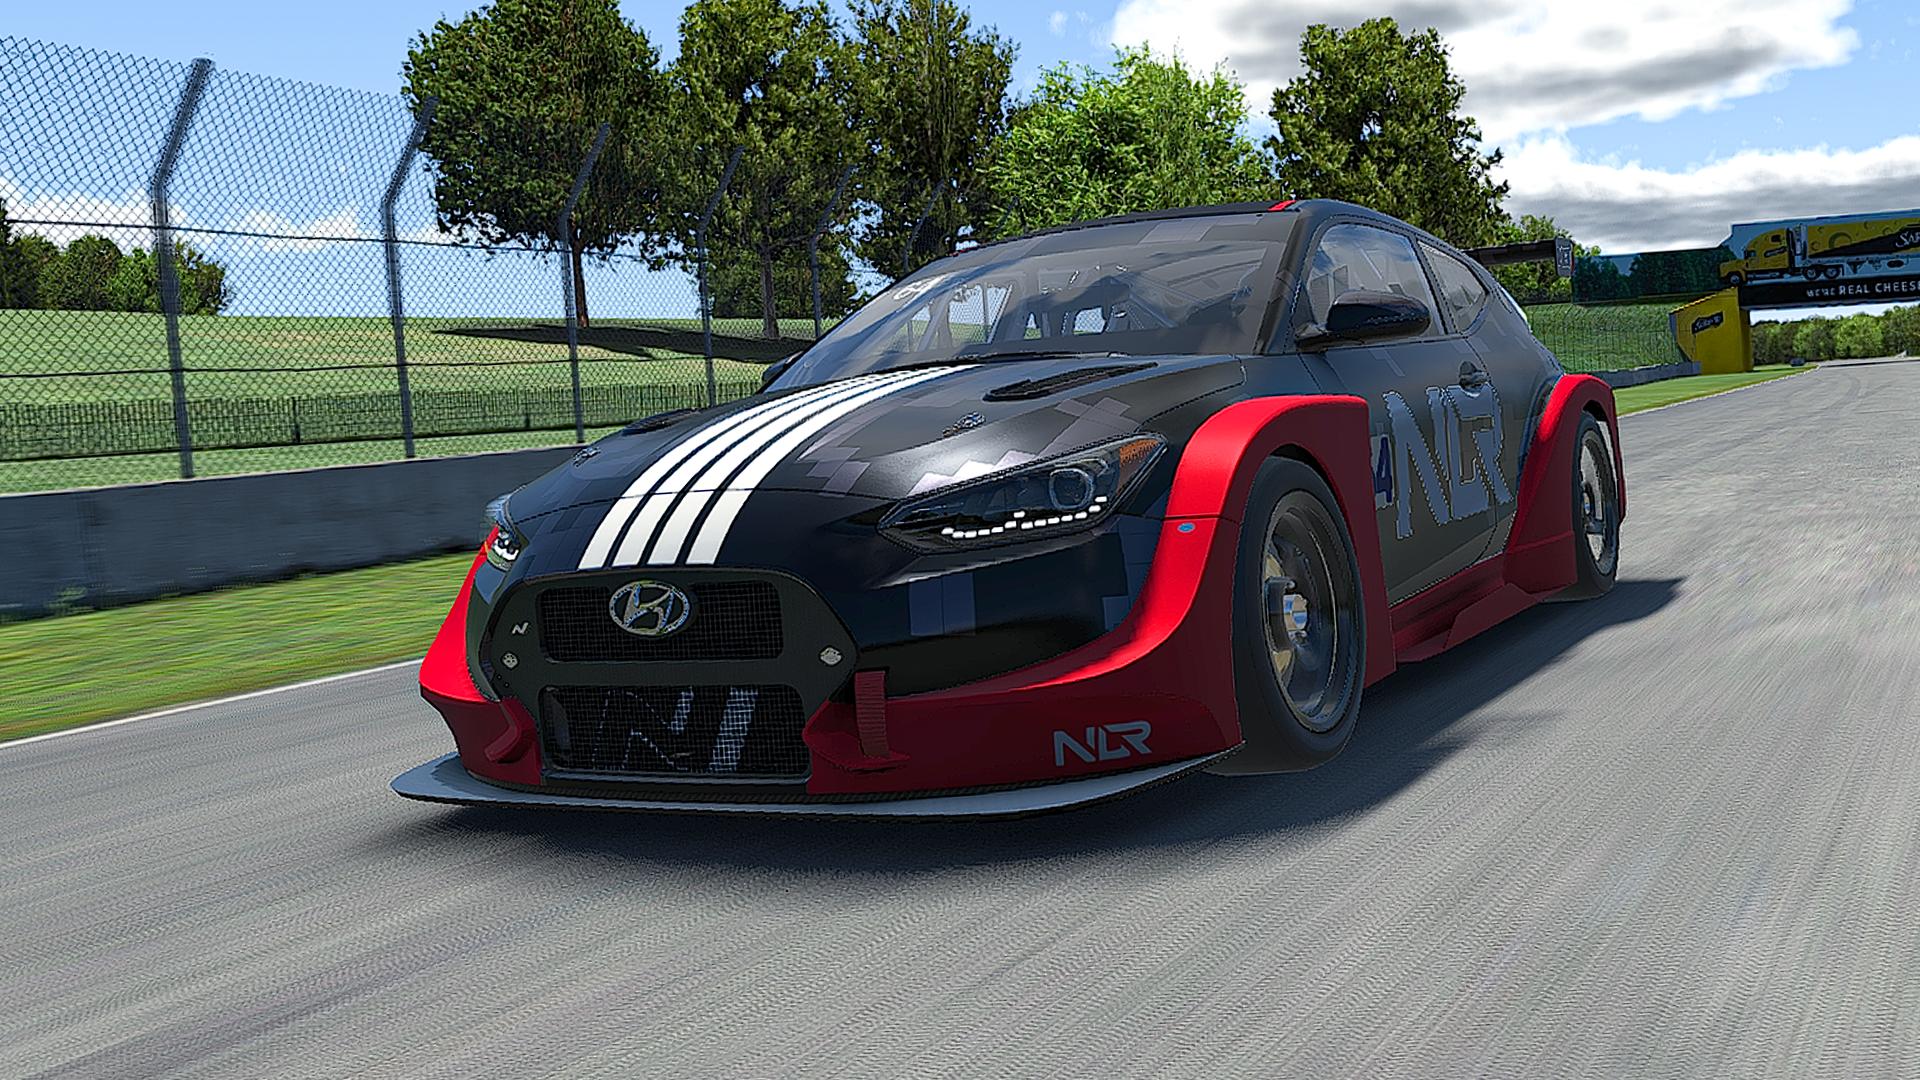 Preview of Next Level Racing 2023 Hyundai Veloster N TC by Brendan Harris